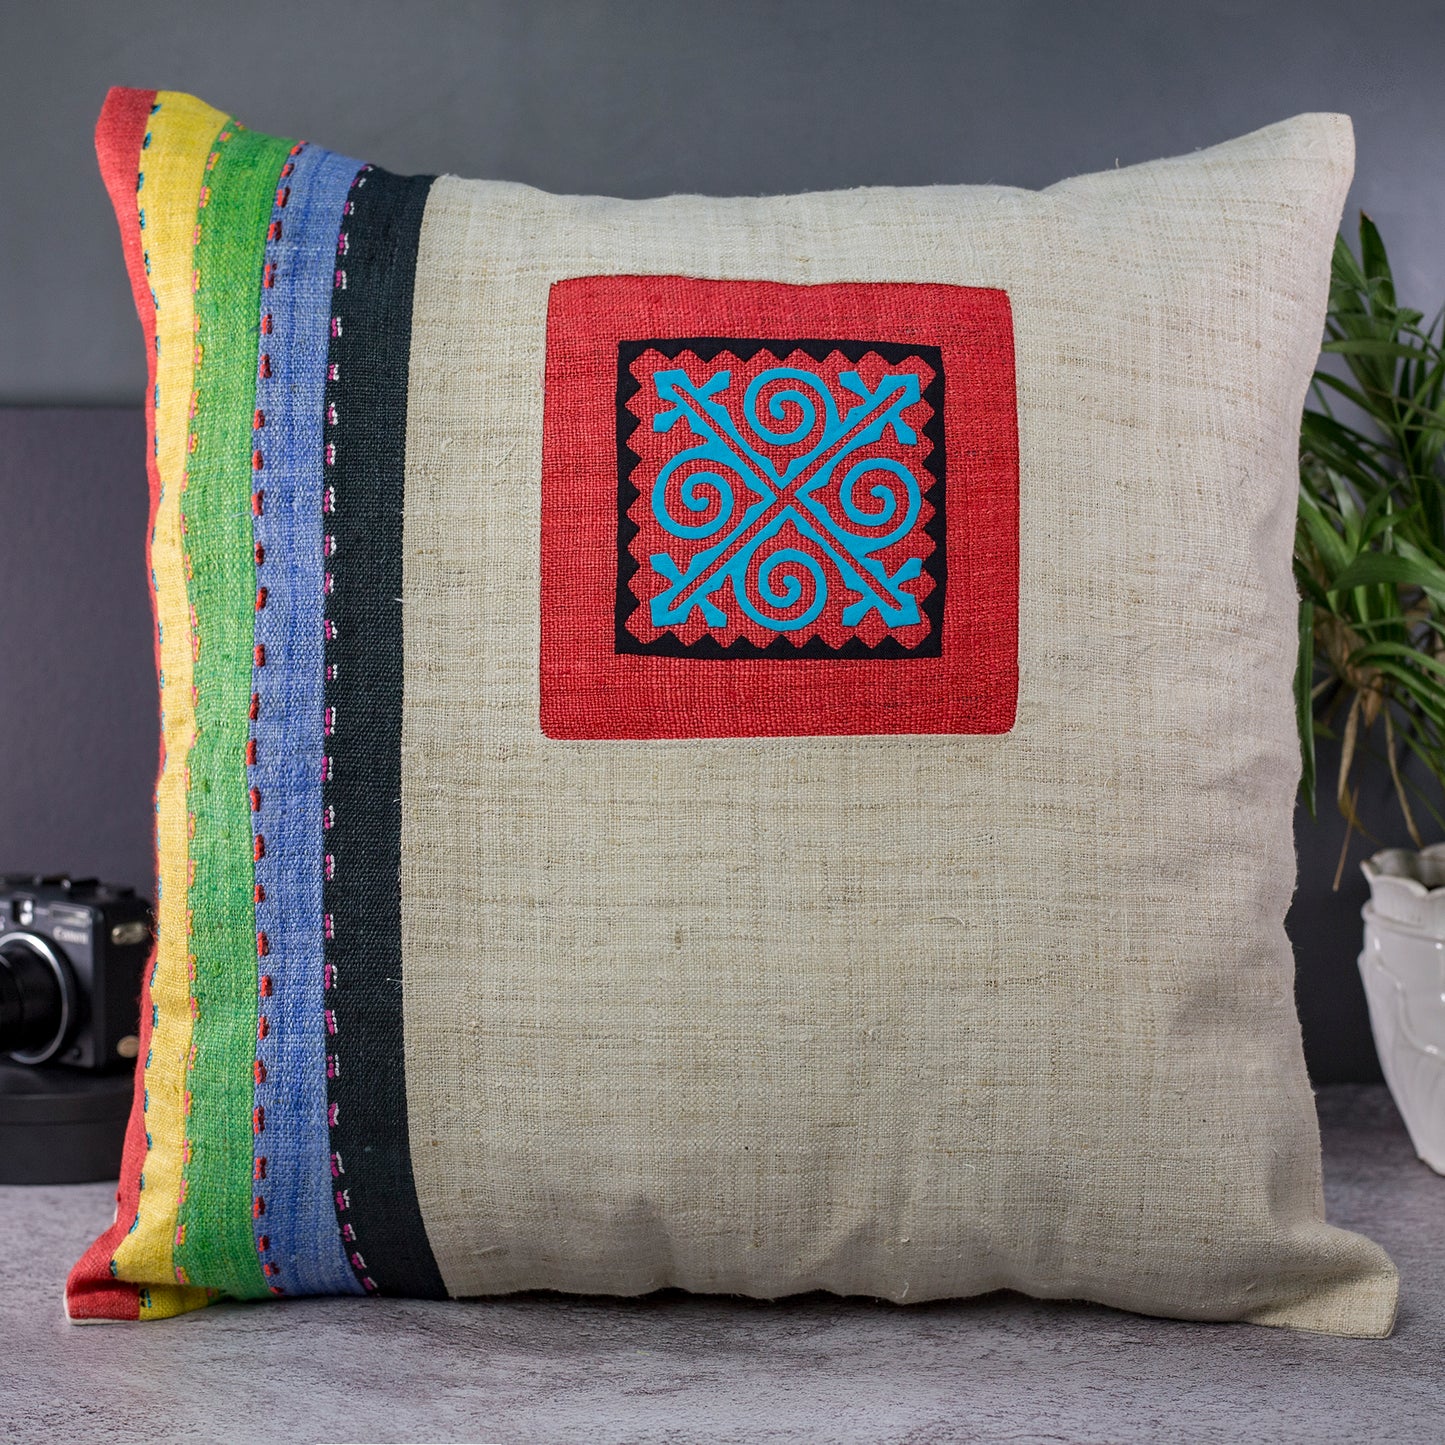 Beige Hemp Cushion Cover with stripes in different colors, hand-stitches on the front